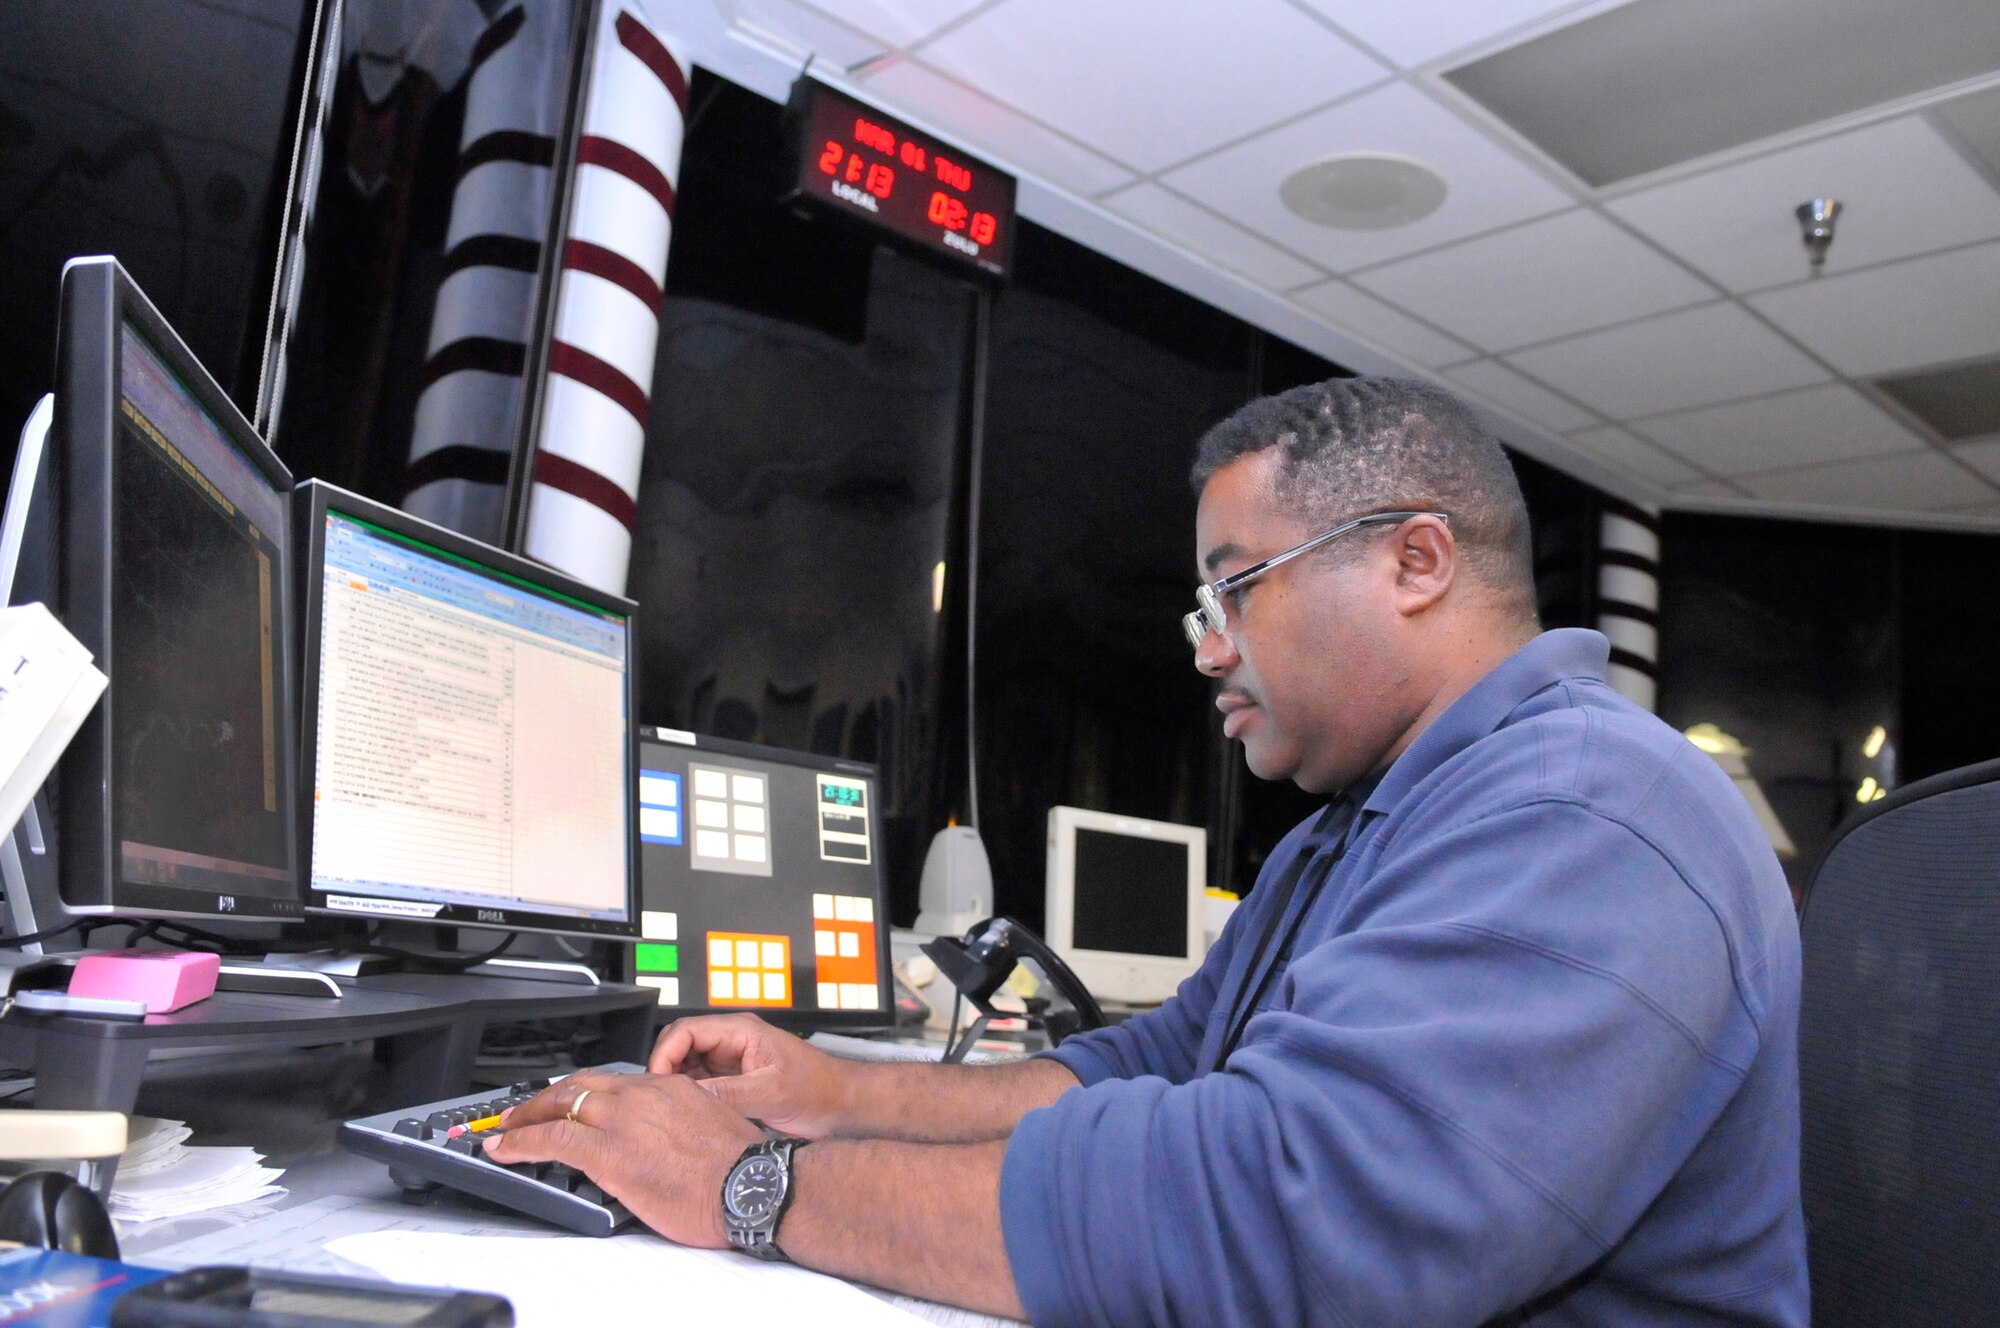 Willie Williams works the swing shift at Base Operations, which is manned 24 hours a day. (U. S. Air Force photo by Sue Sapp)